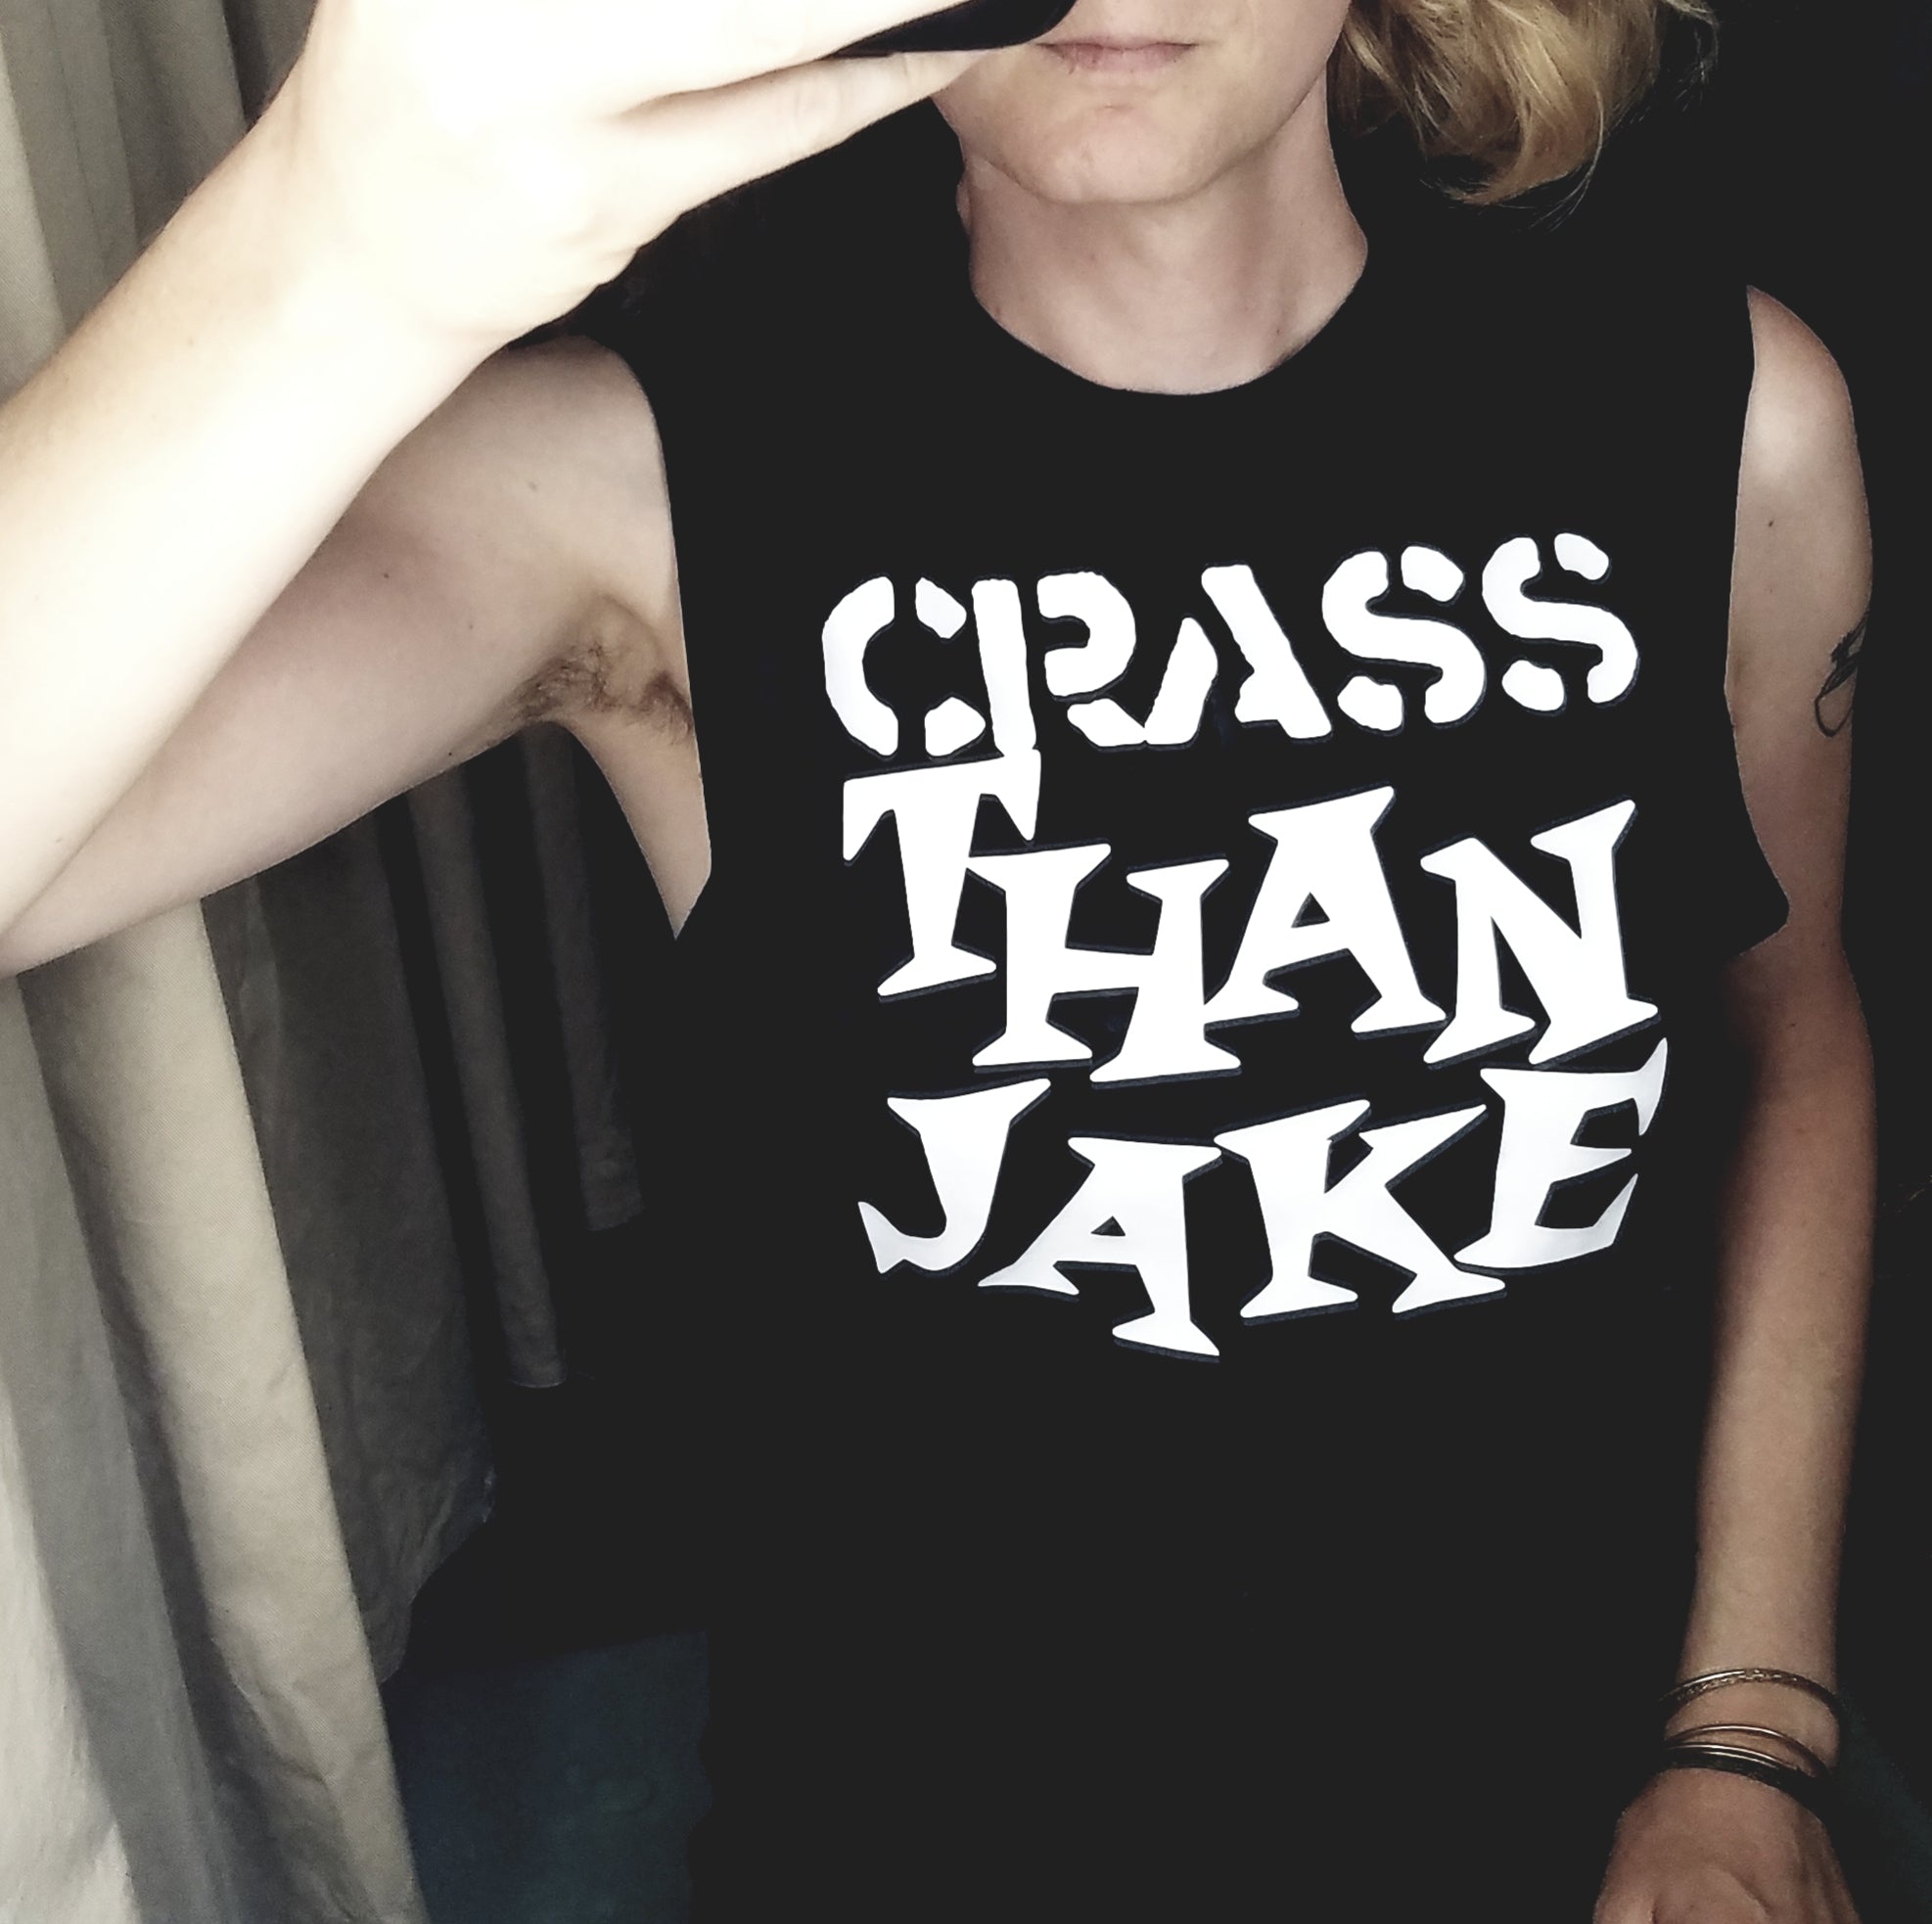 CRASS THAN JAKE shirt with sleeves cut off